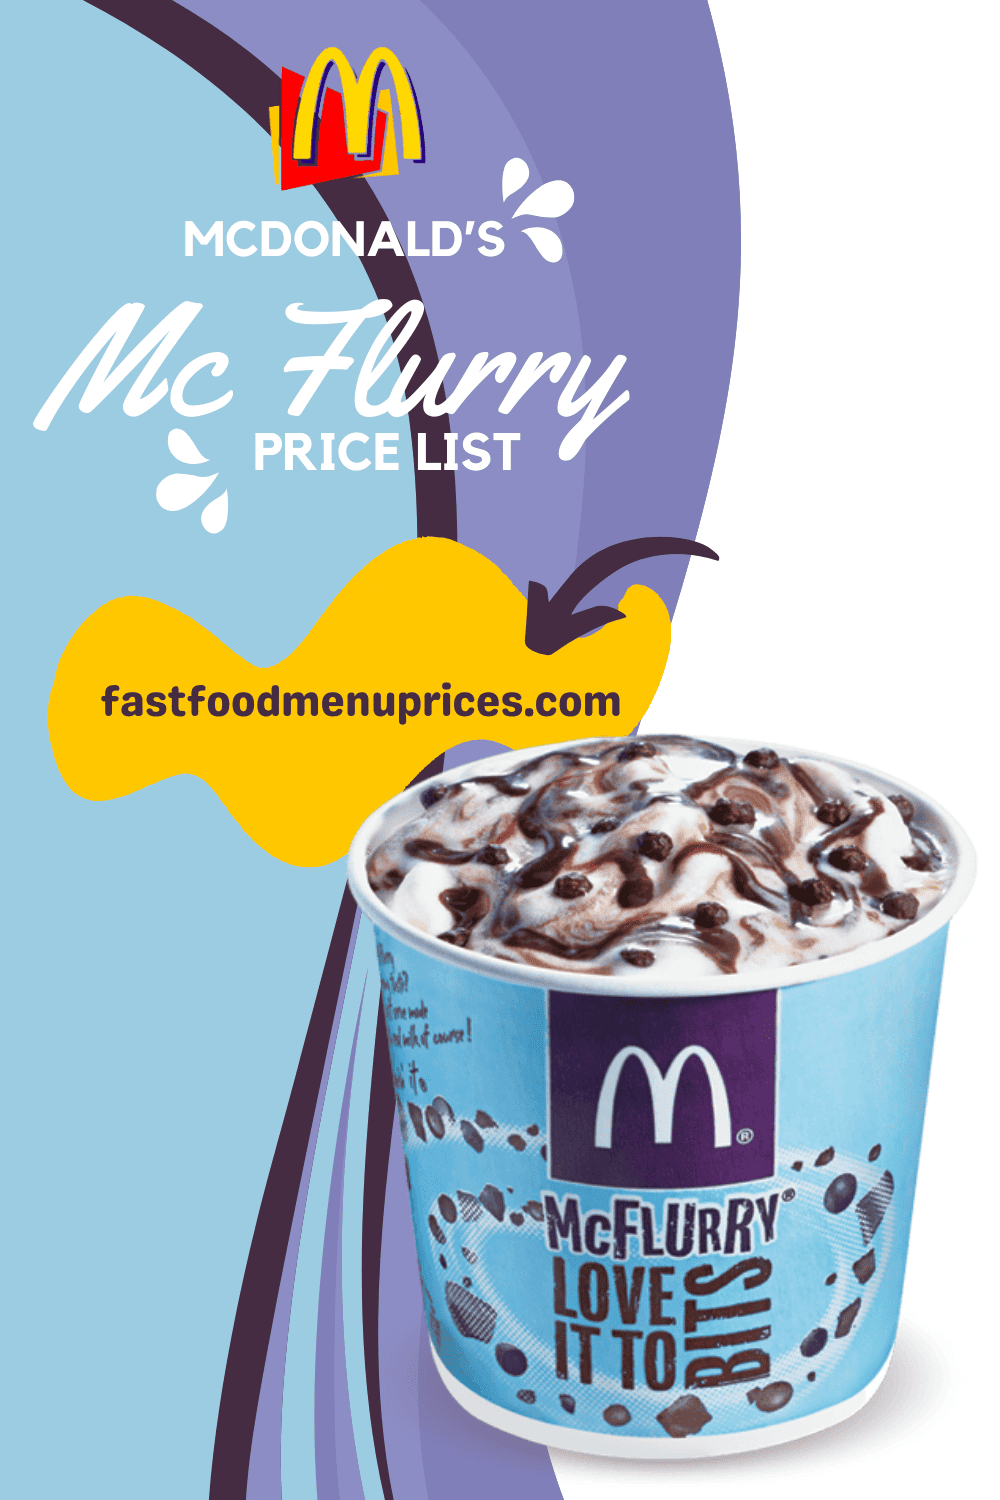 Enjoy the indulgent treat of a McDonald's McFlurry - perfect for satisfying your sweet cravings.